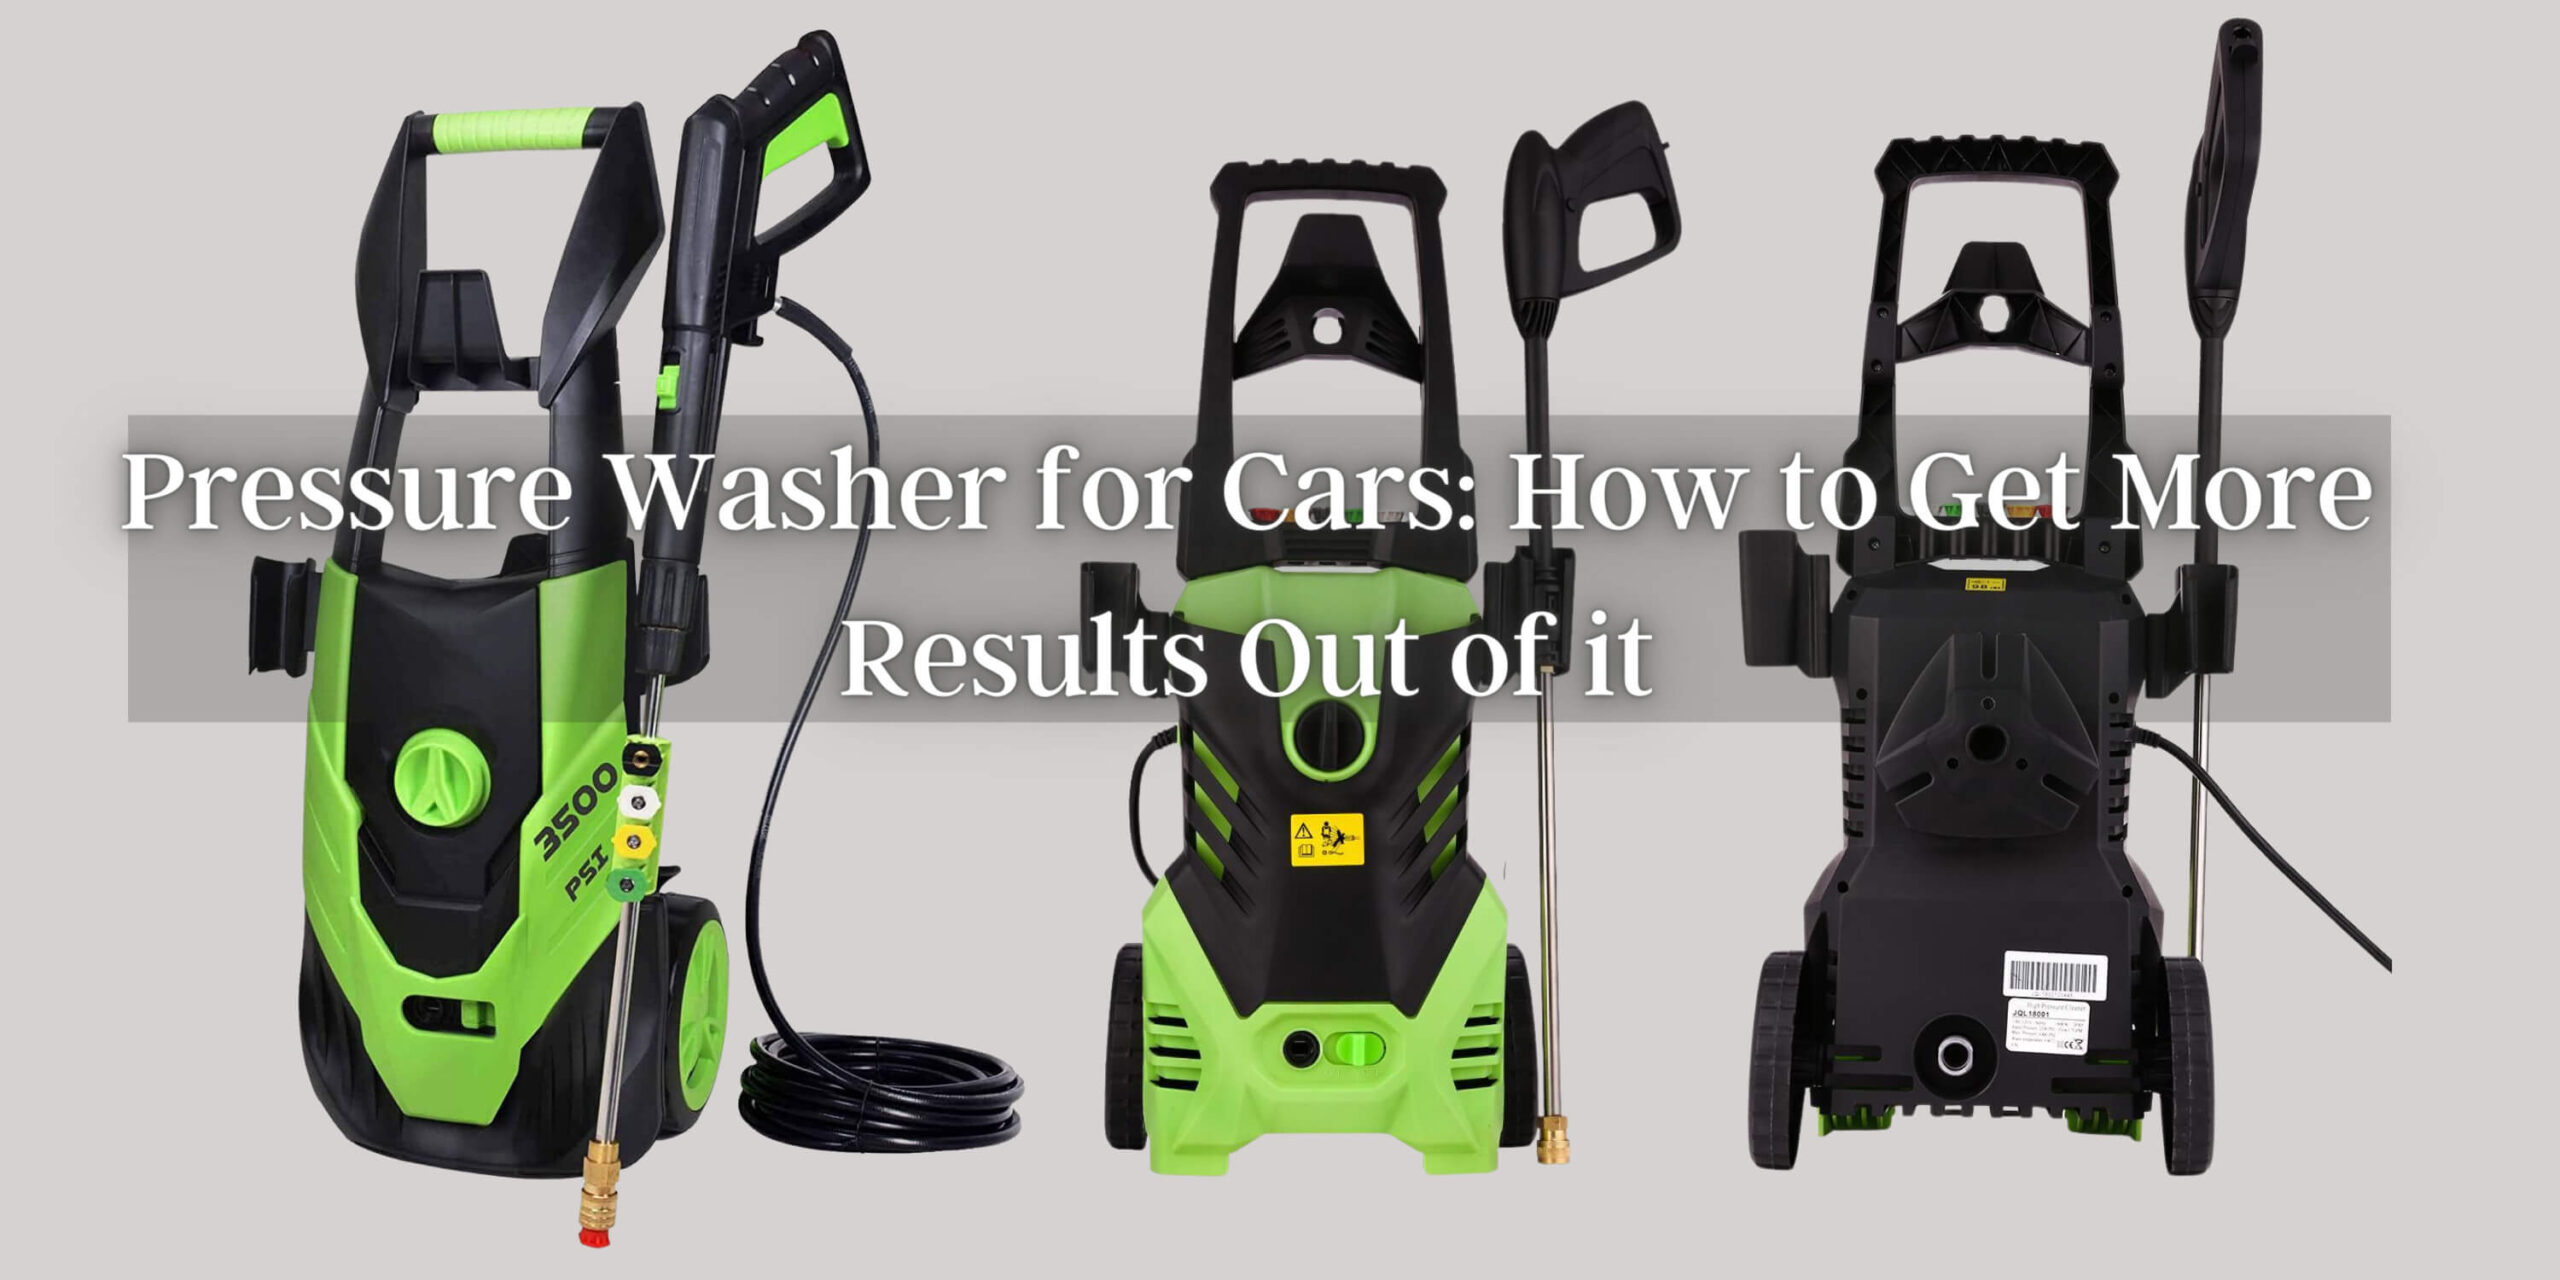 Pressure Washer for Cars: How to Get More Results Out of it